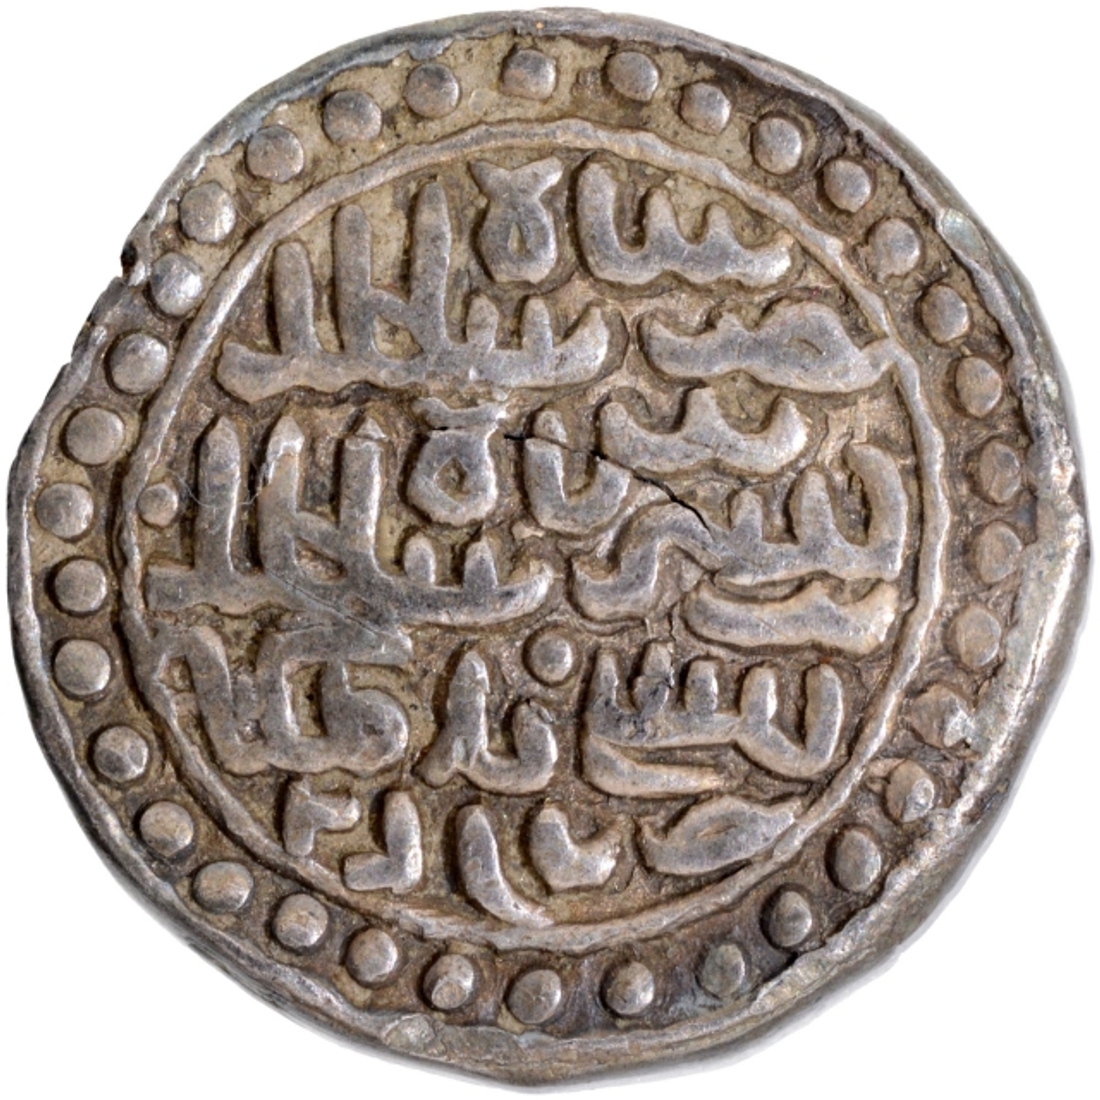  Centrally Struck with Complete Dotted Border Silver Tanka Coin of Nasir ud din Nusrat of Nusratabad Mint of Bengal Sultanate of AH 927.